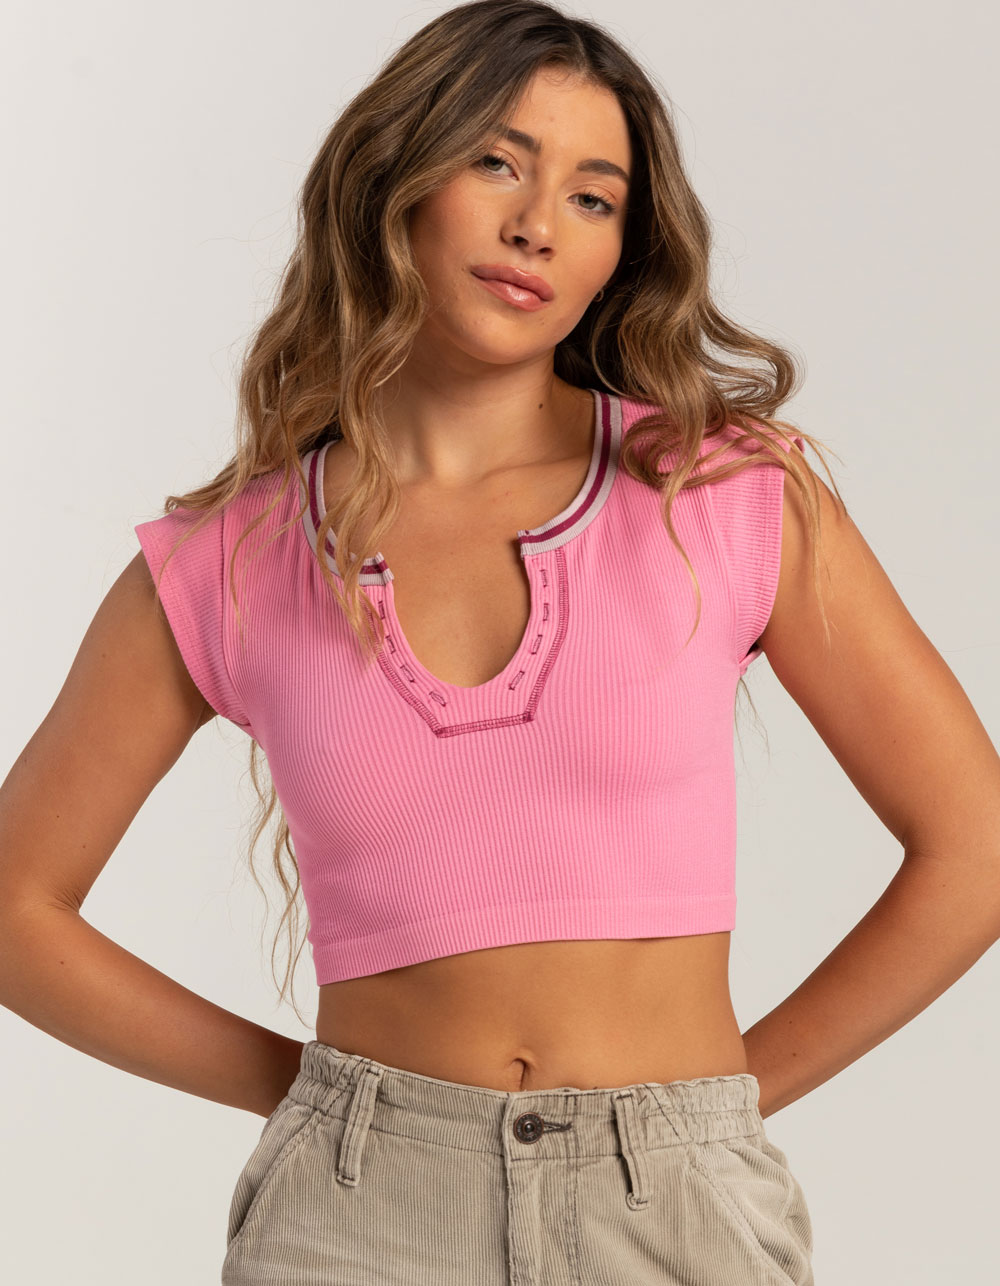 BDG Urban Outfitters Seamless Go For Gold Womens Crop Top